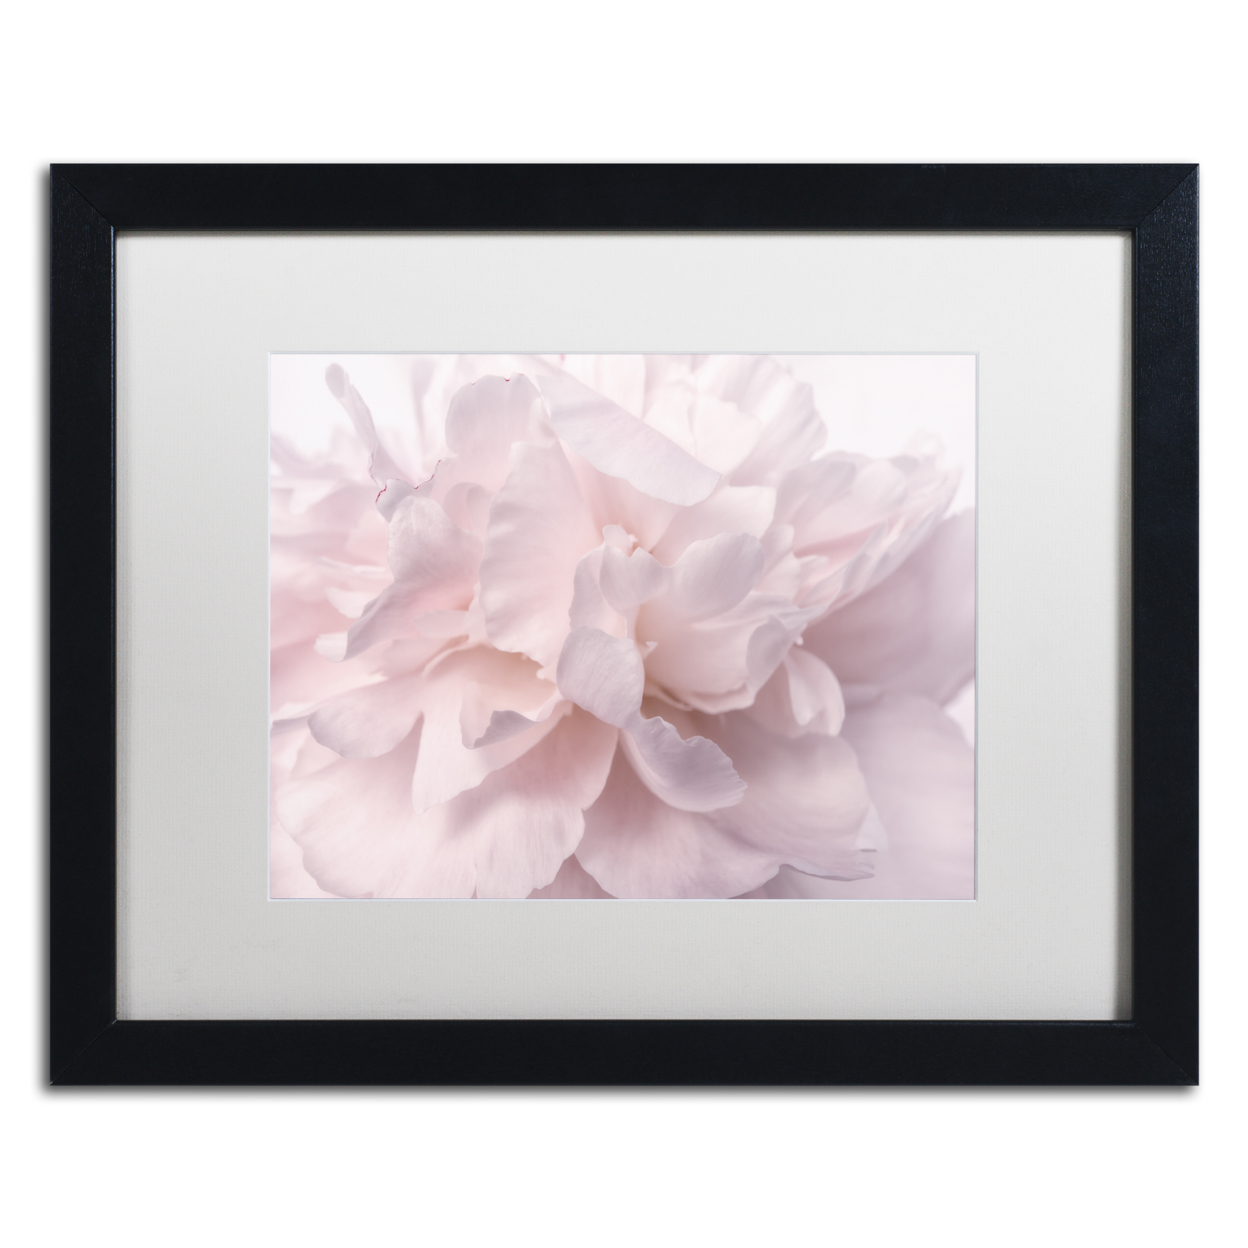 Cora Niele 'Pink Peony Petals II' Black Wooden Framed Art 18 X 22 Inches